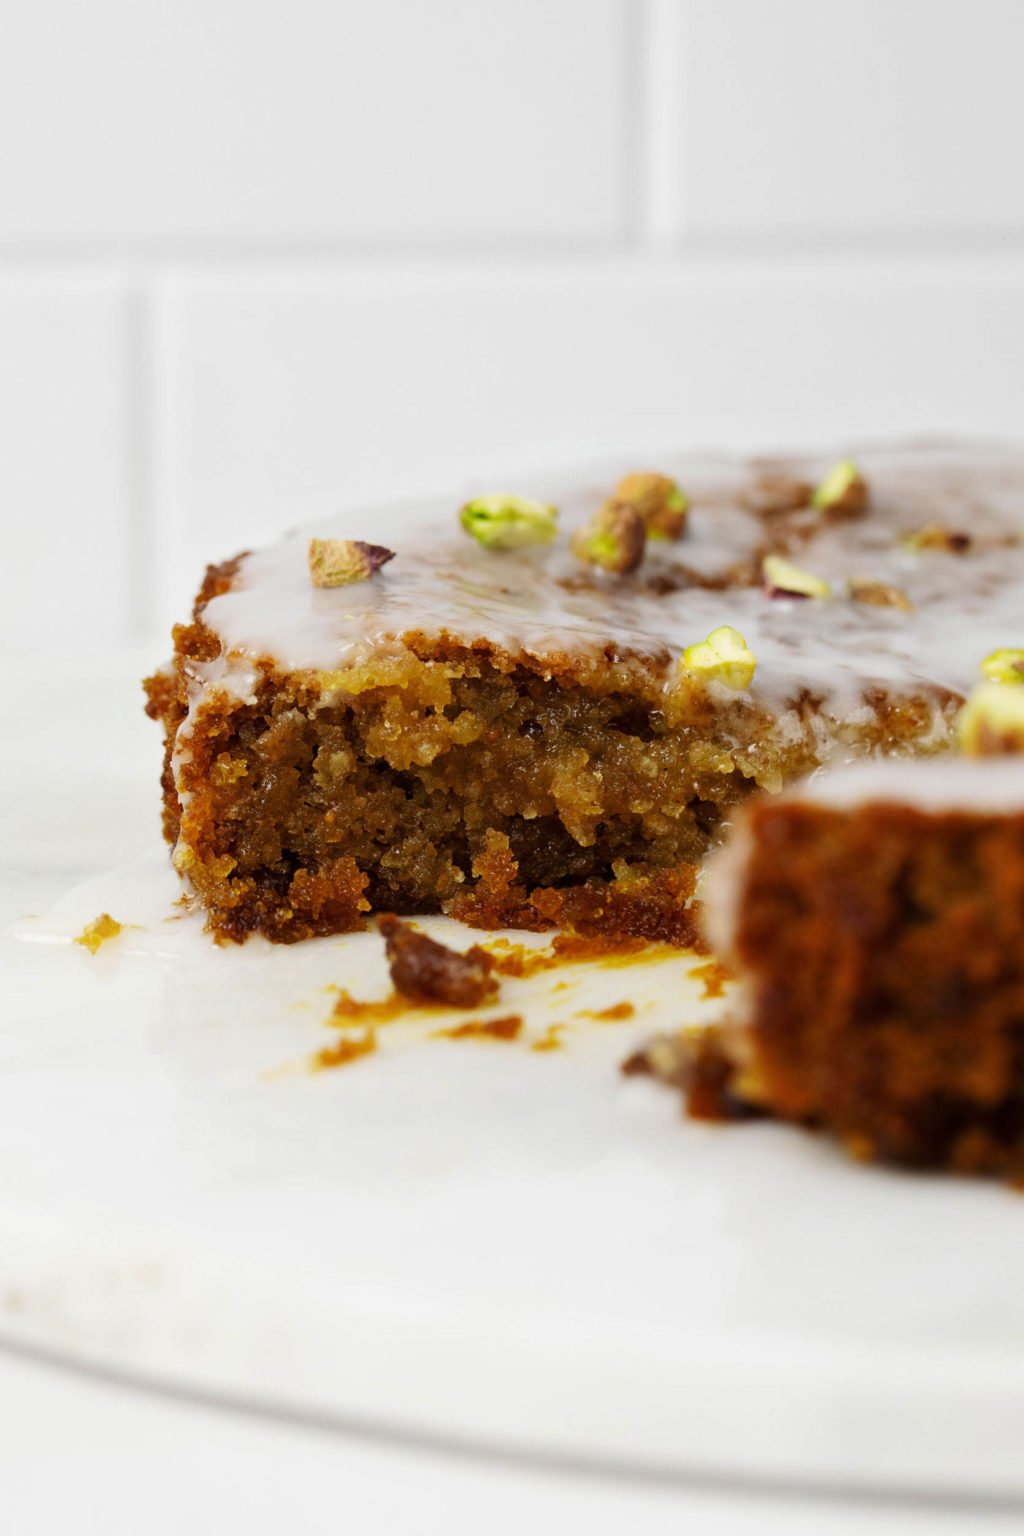 A glazed cake has been topped with chopped nuts. A slice has been removed. The cake is pictured against a white backdrop.